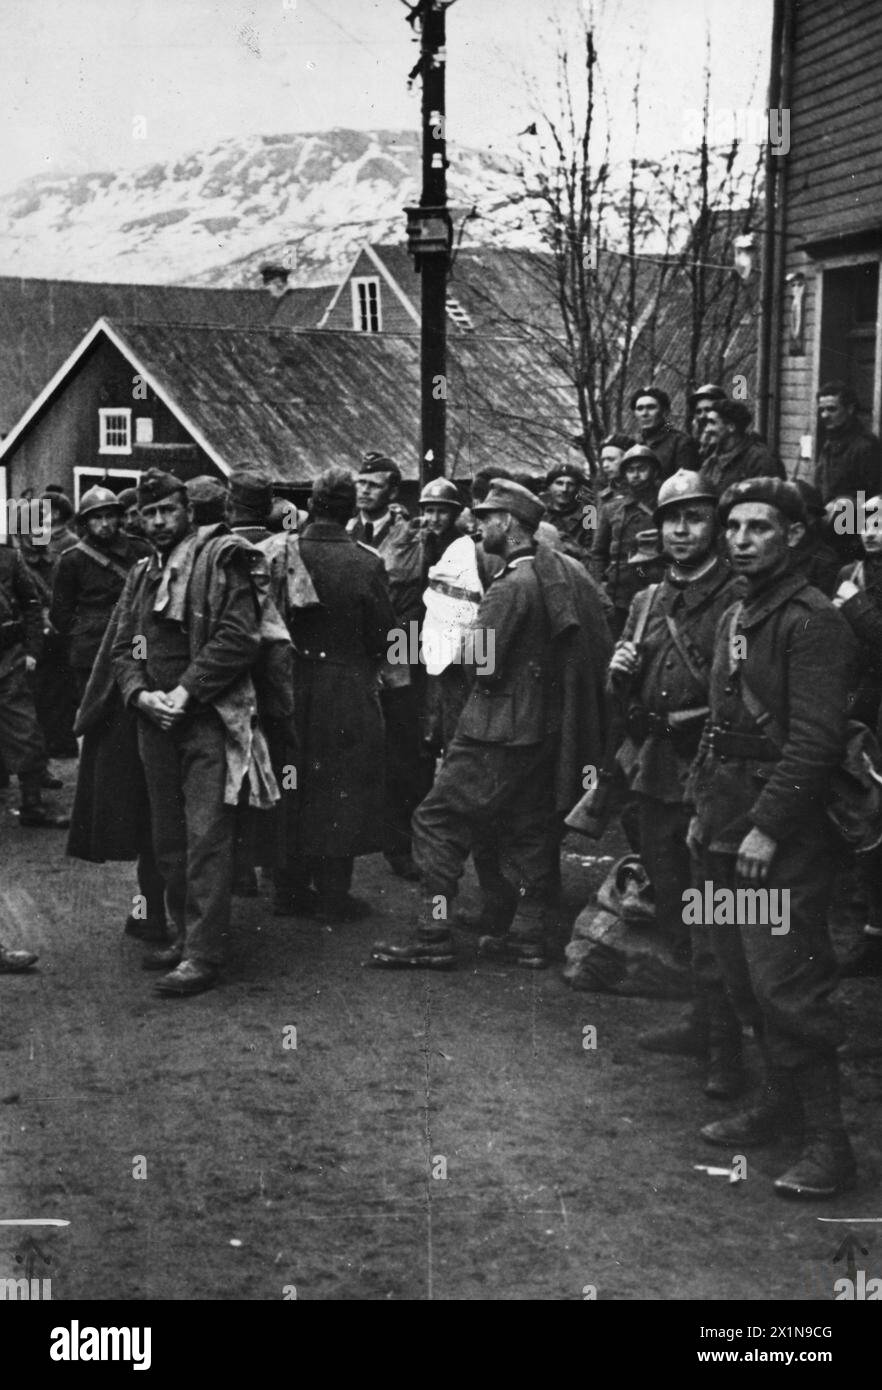 THE POLISH ARMY IN THE NORWEGIAN CAMPAIGN, 1940 - Troops of the Independent Podhalan Rifles Brigade guarding German prisoners captured during the battle for Narvik, early June 1940. Note a Luftwaffe officer (also featured in N 231 photograph) and an alpine (Gebirgsjager) soldier amongst prisoners, Polish Army, Polish Army, Polish Independent Highland Brigade, German Army Stock Photo